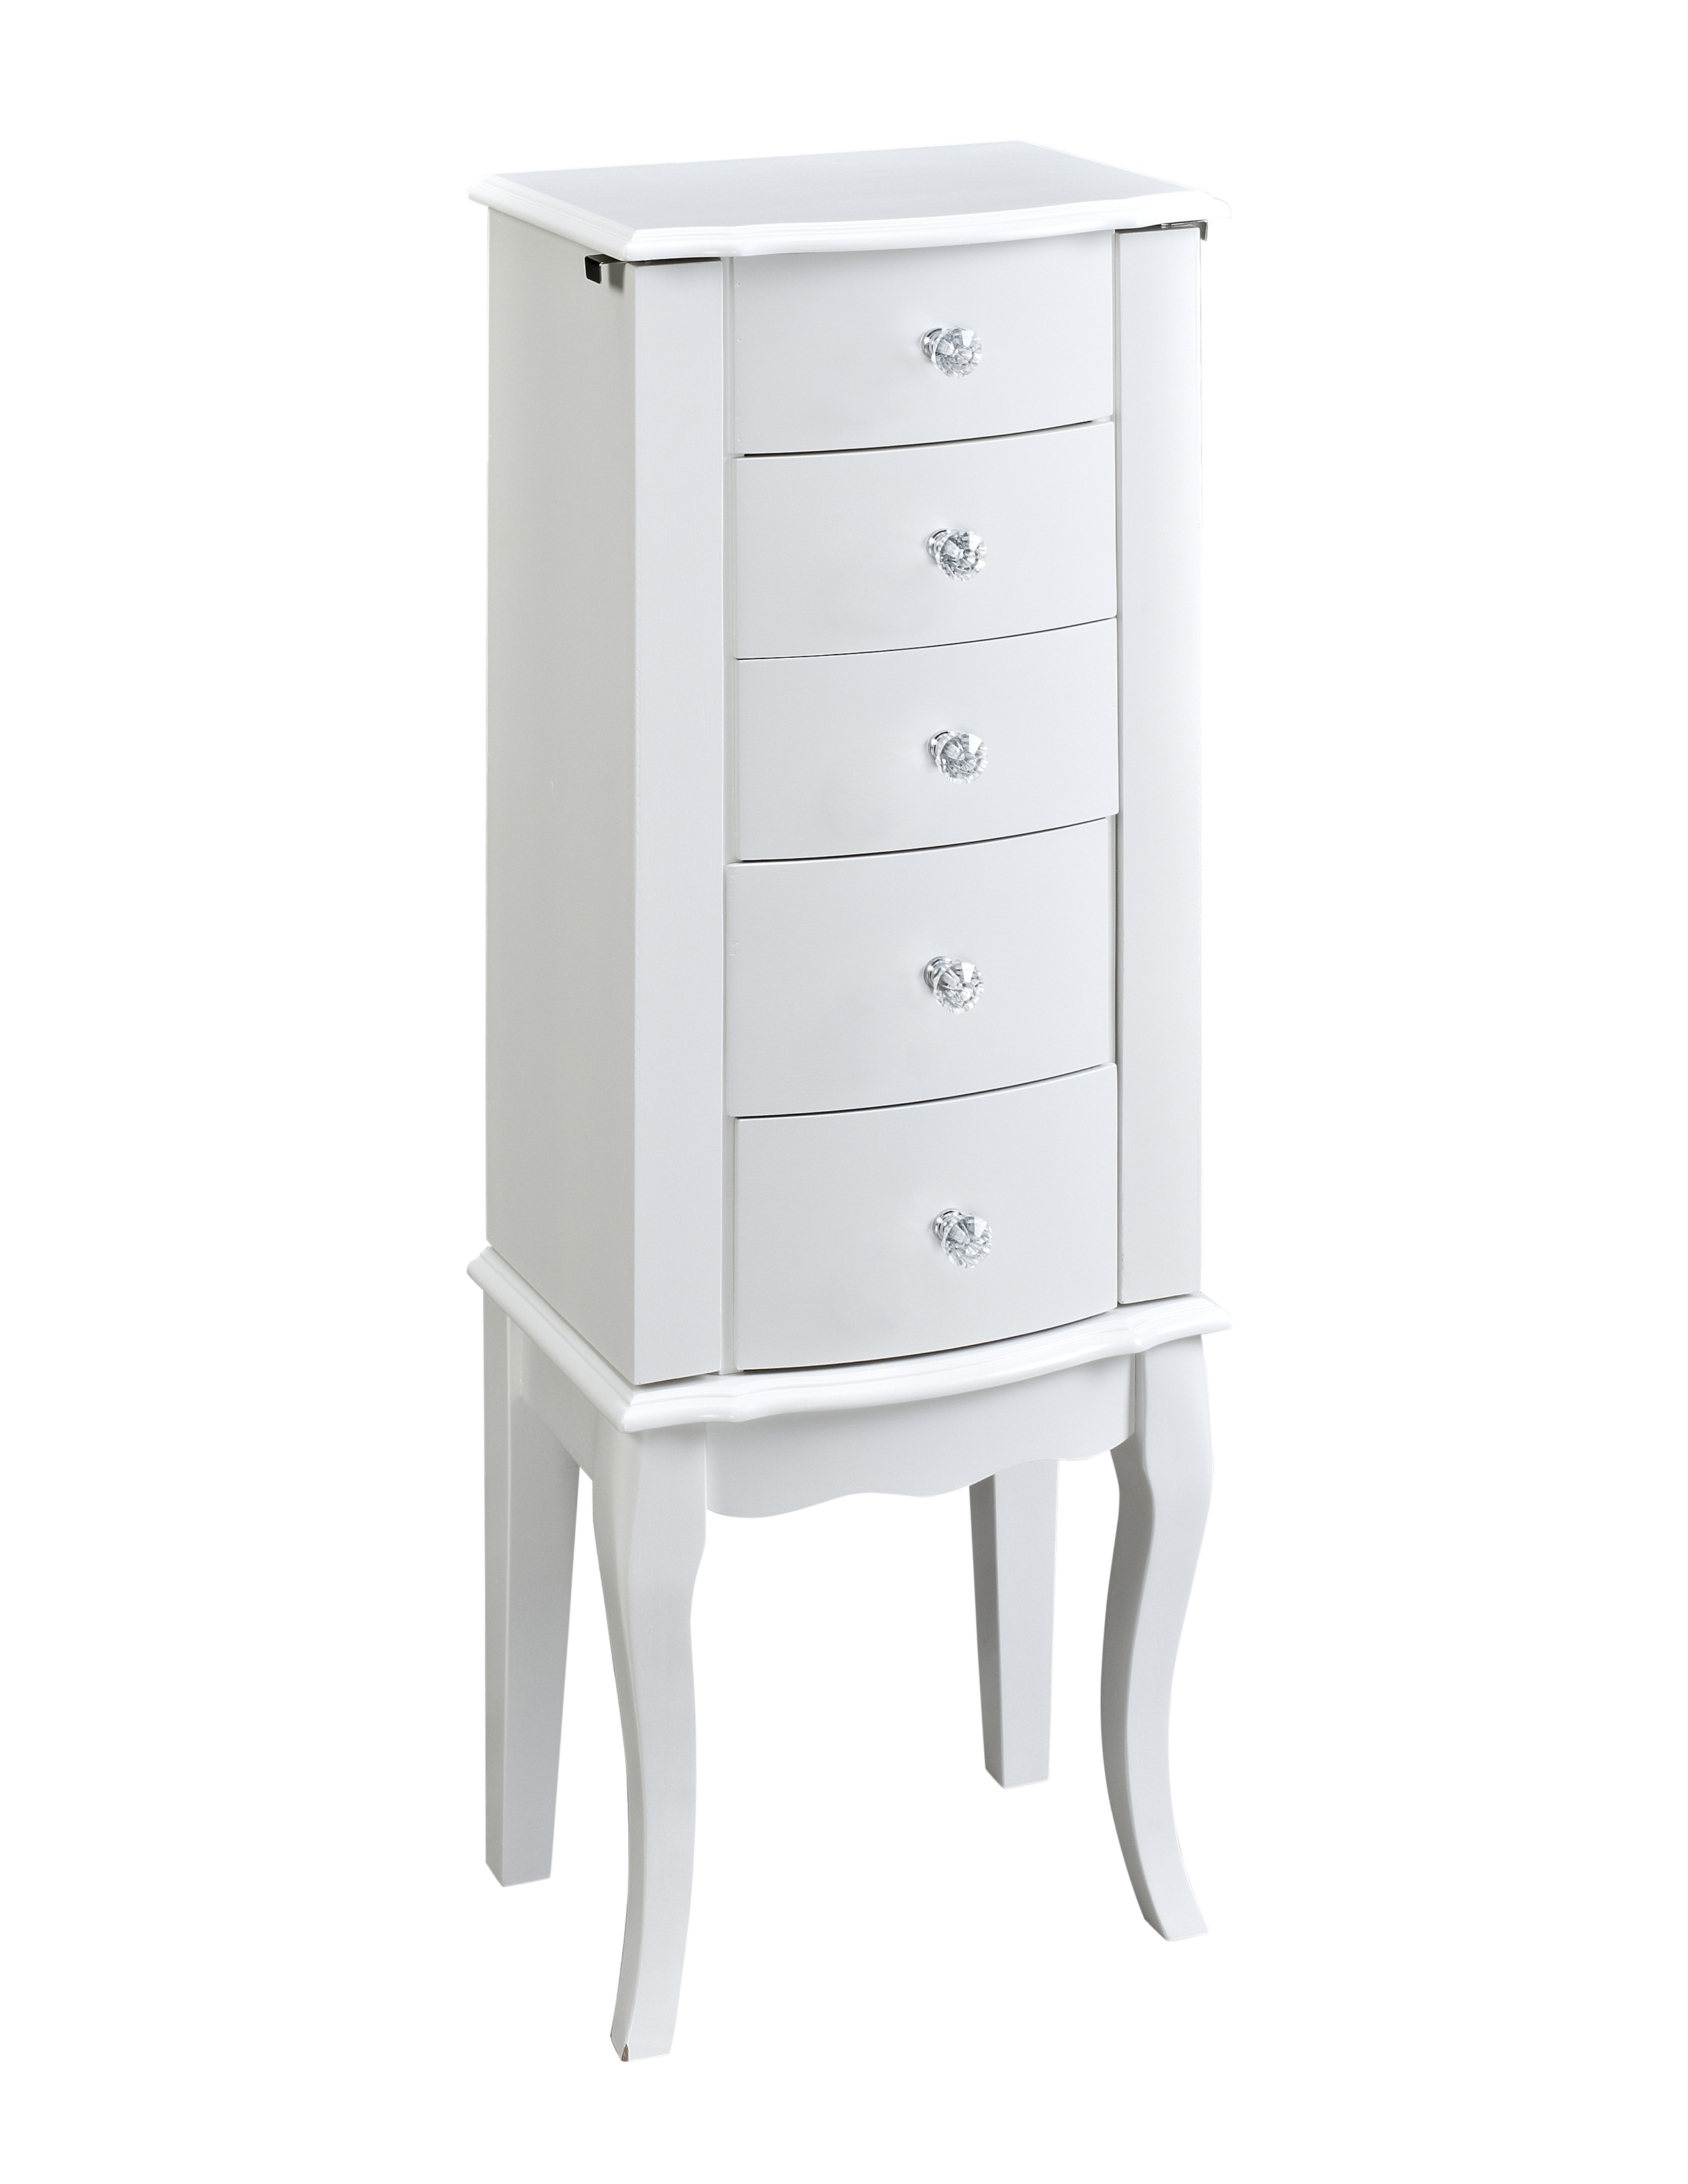 L Powell White Jewelry Armoire